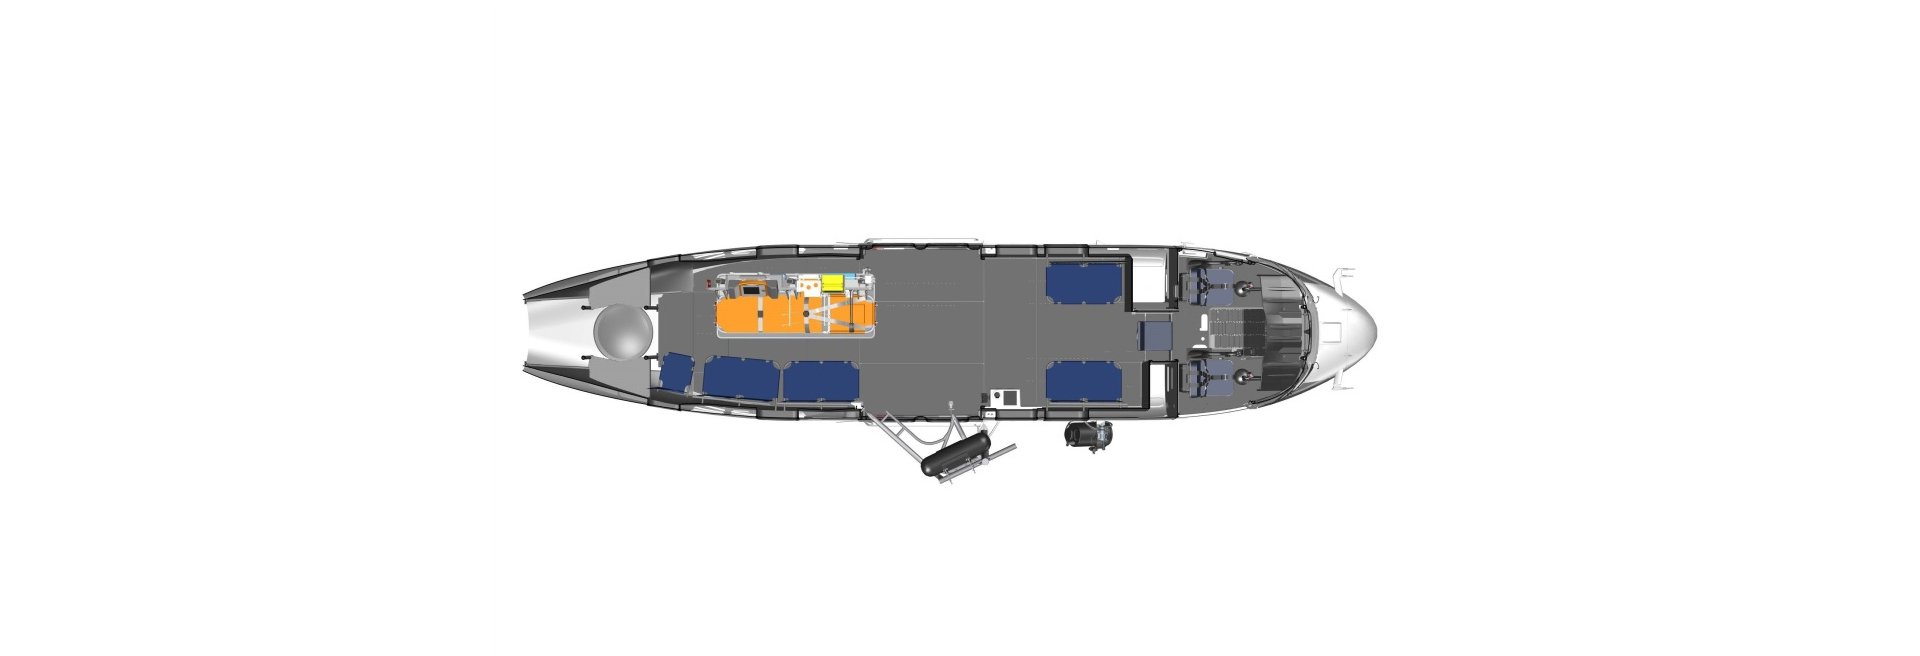 Diagram of an Airbus H215 helicopter cabin configured for search and rescue and/or medical evacuation (Medevac) operations. 